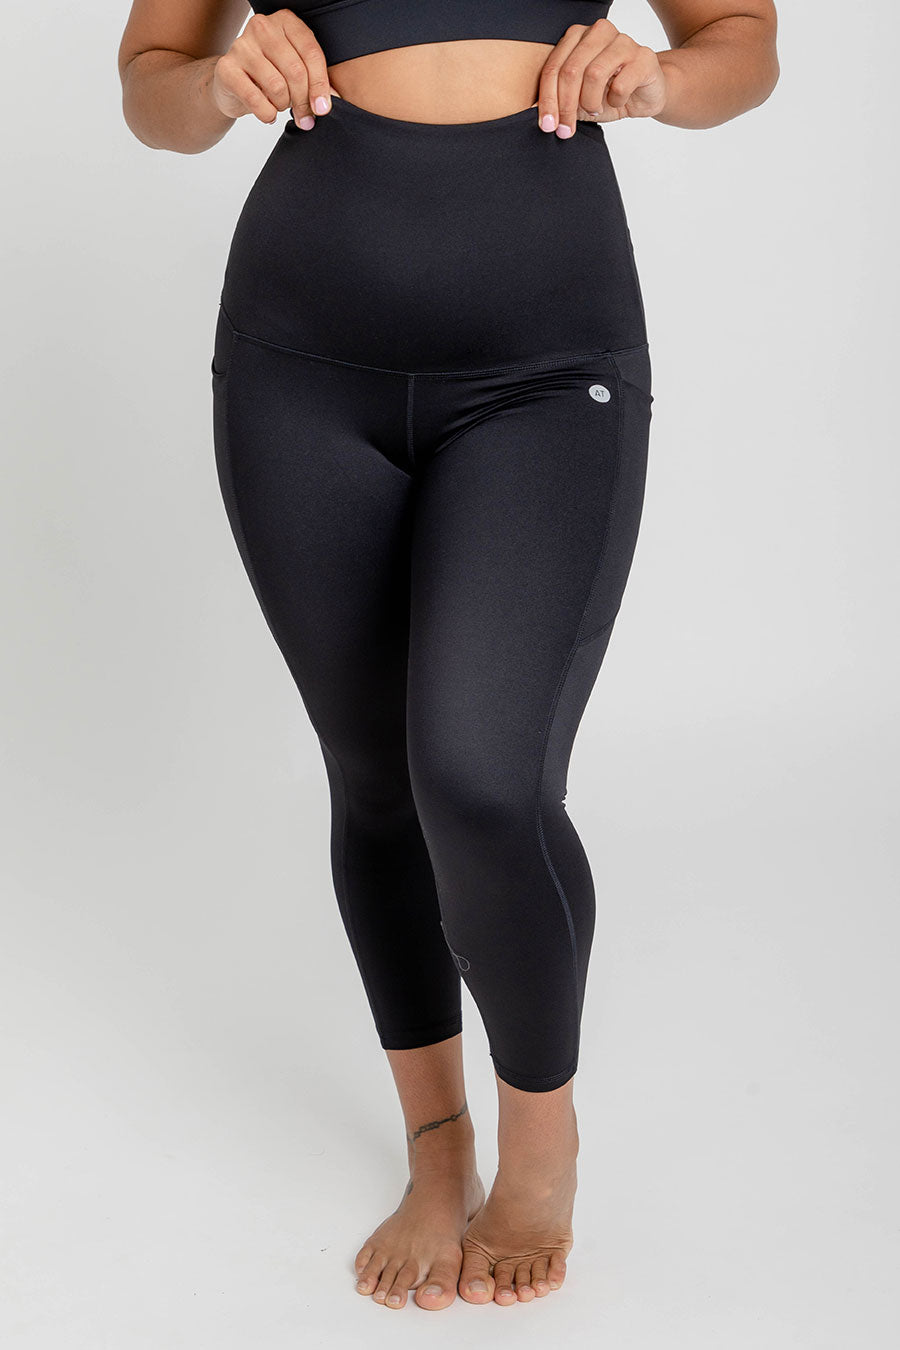 Postnatal Recovery Pocket 7/8 Length Tight - Black from Active Truth™
